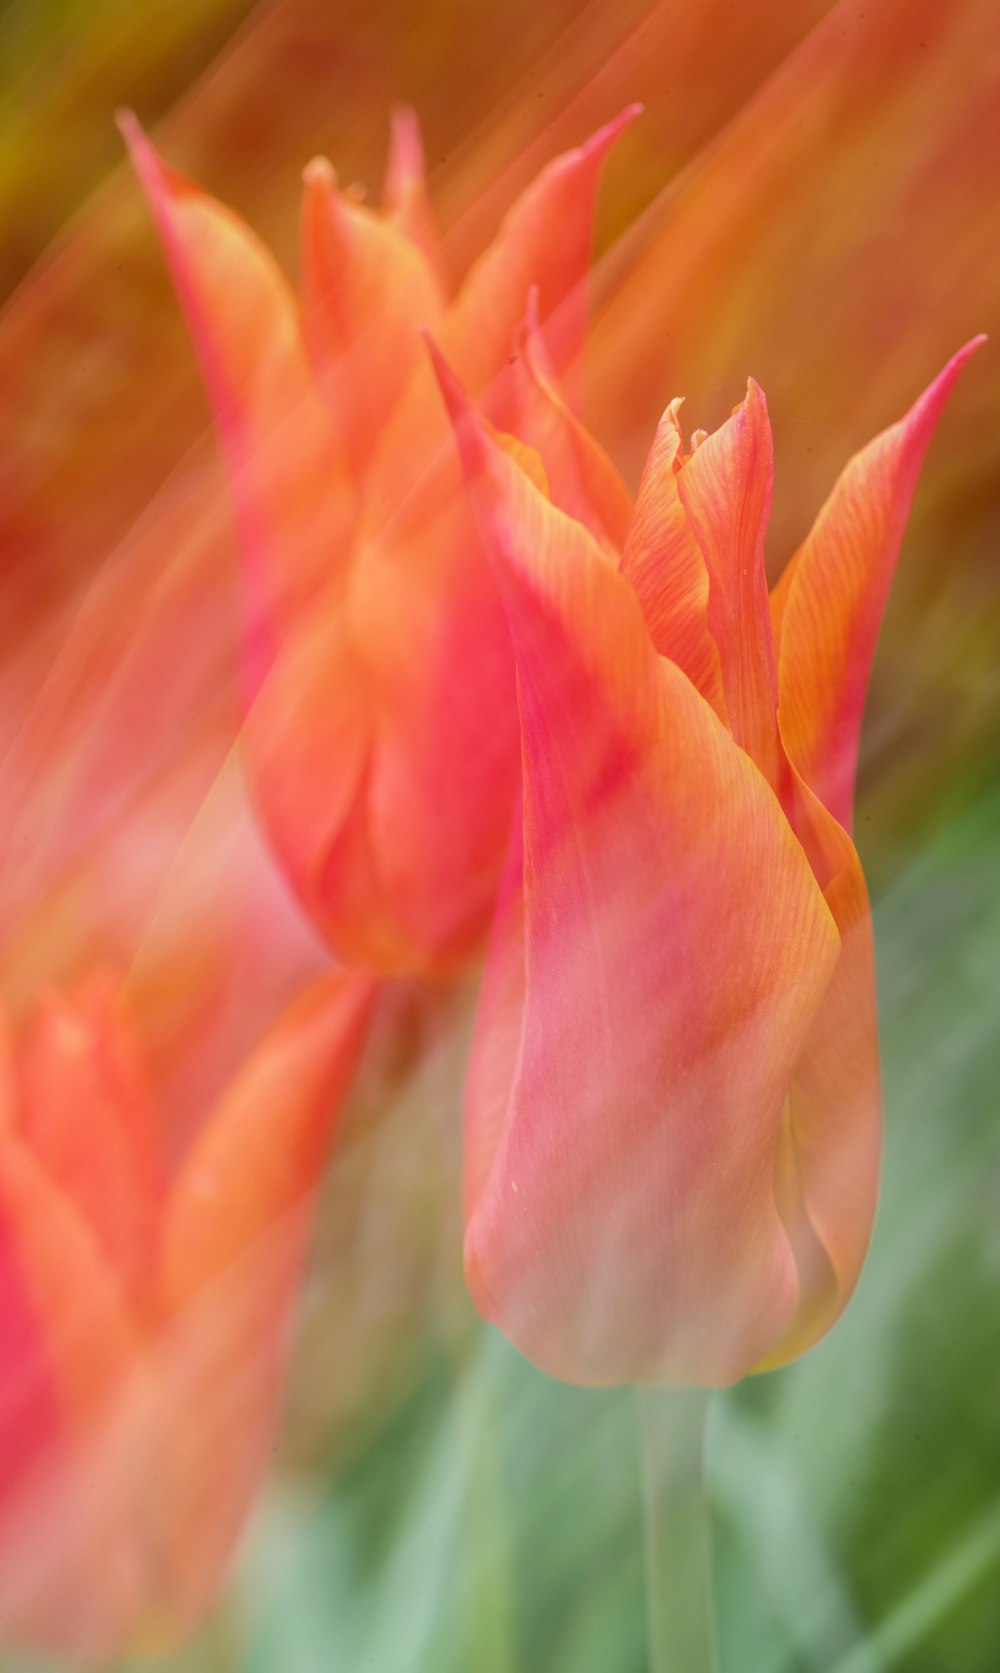 a blurry photo of a bunch of orange tulips